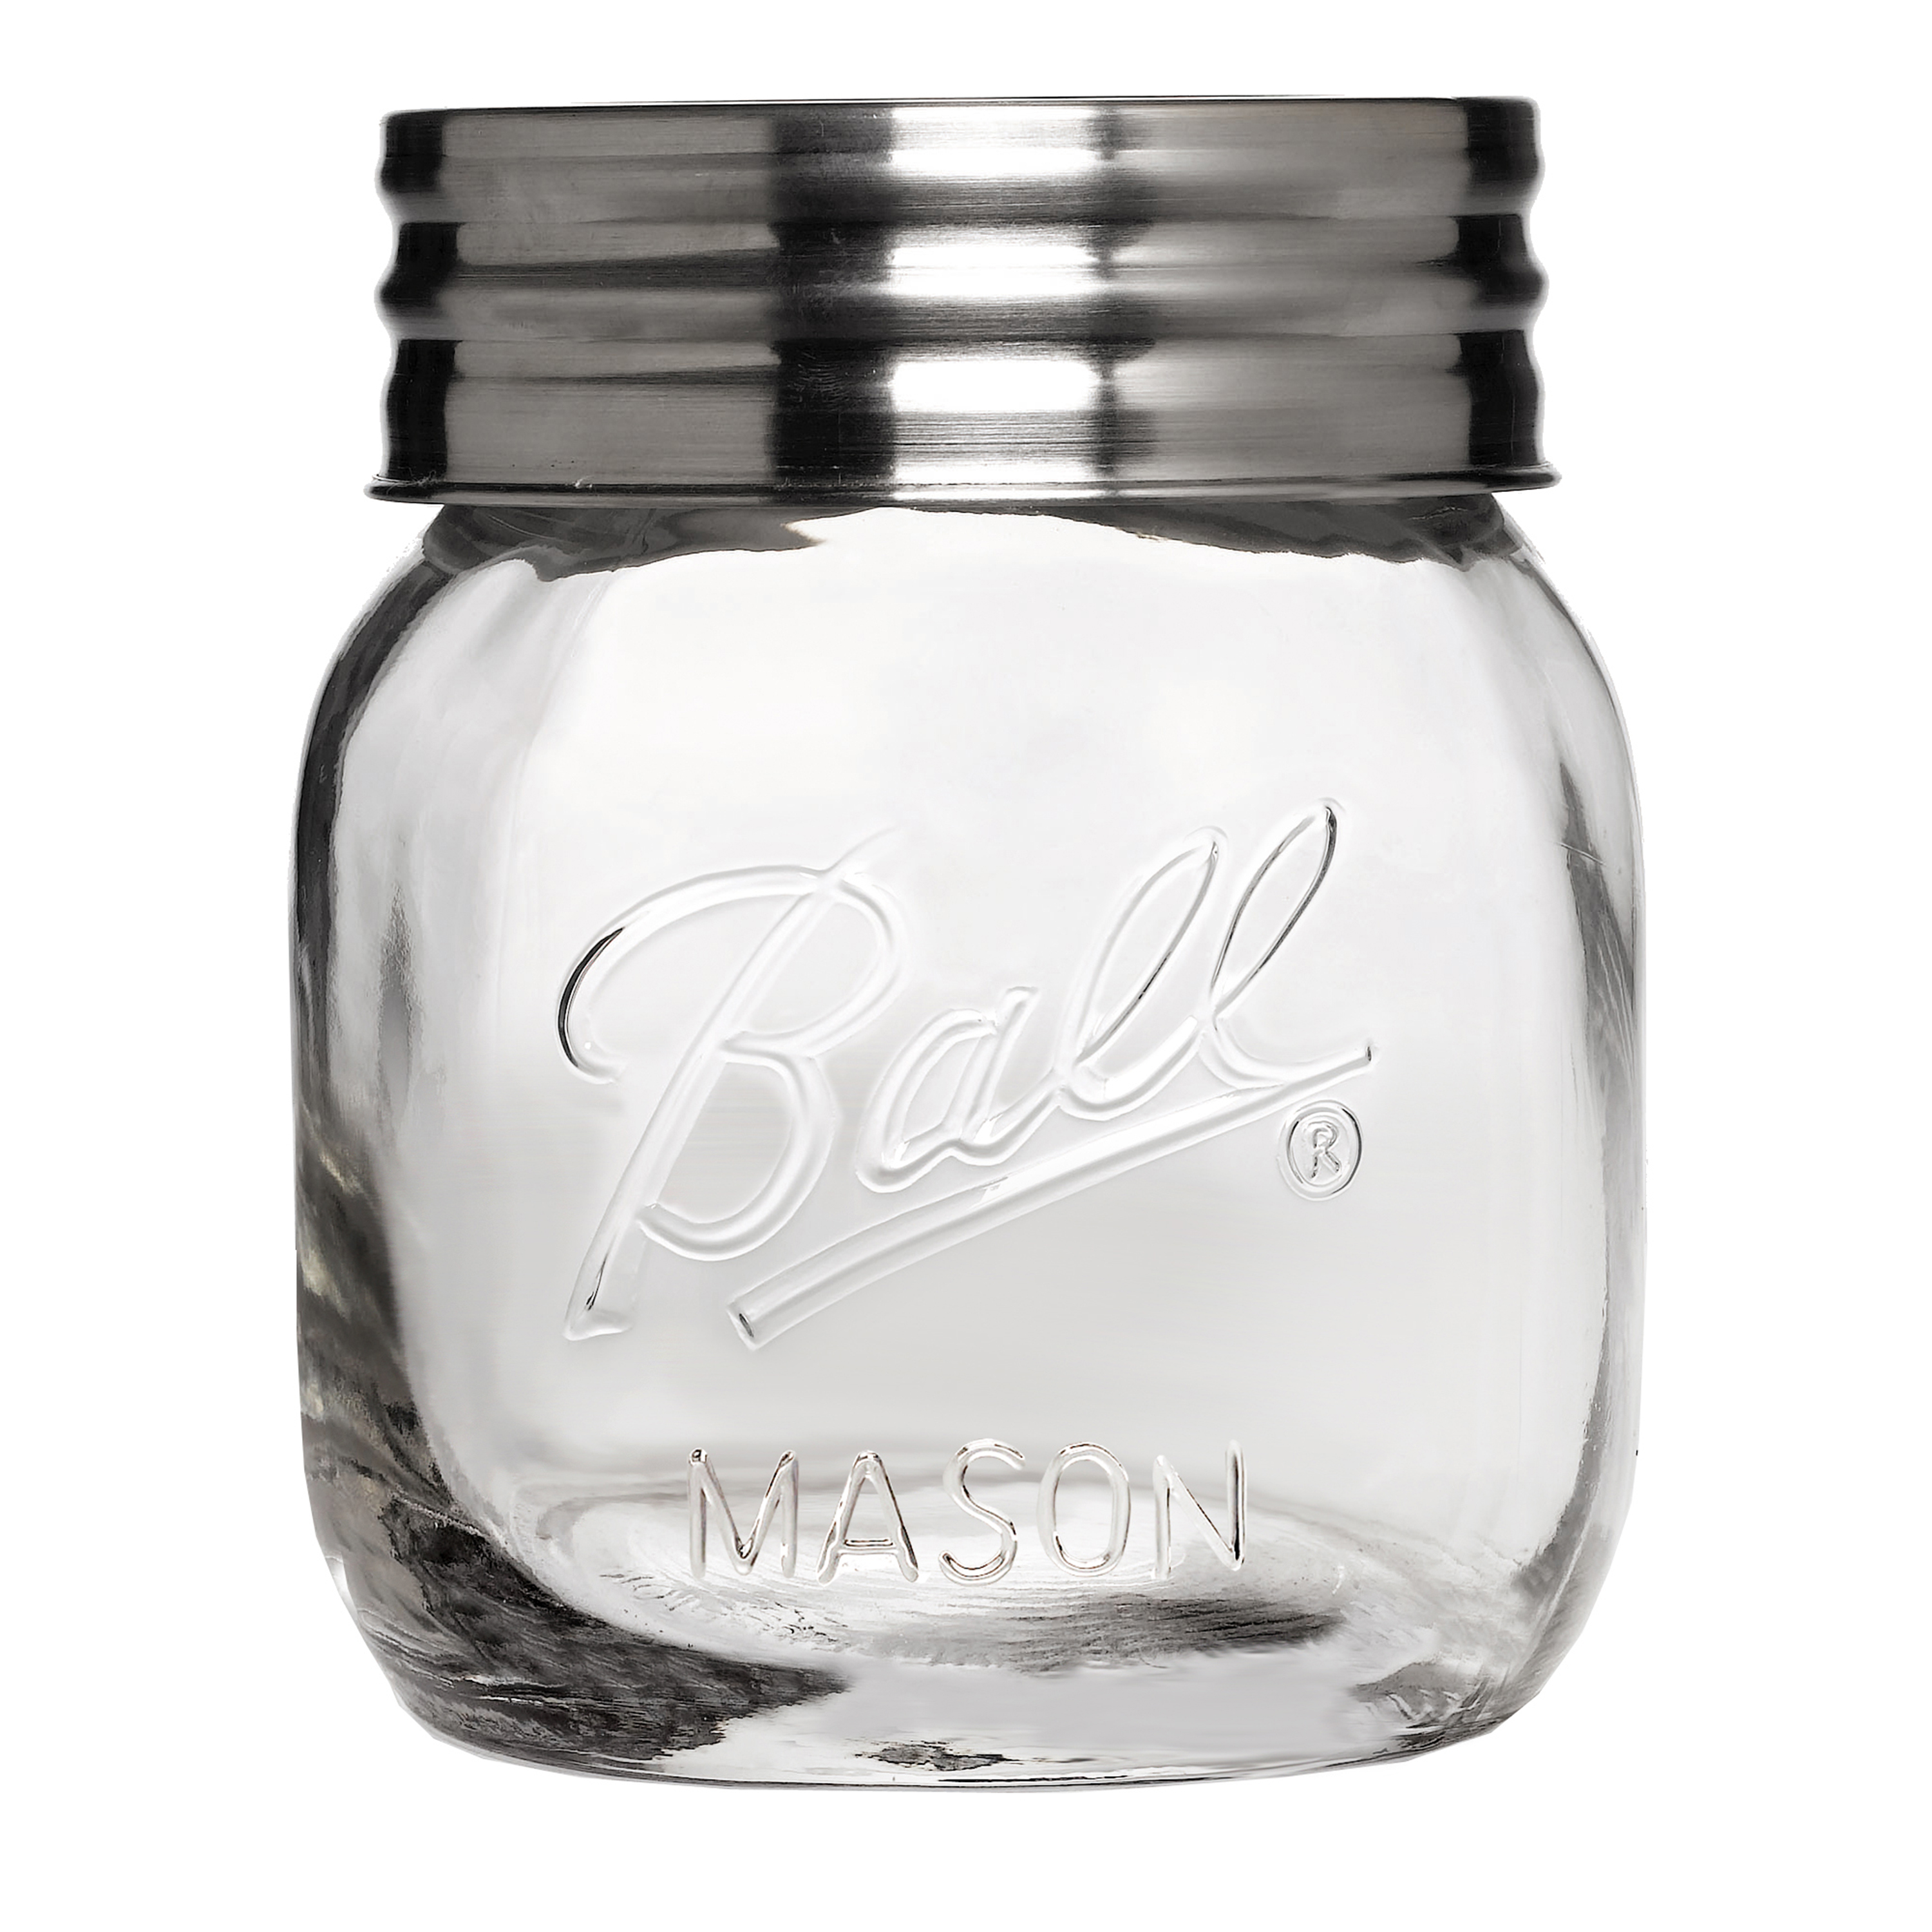 Ball® Extra Wide Half-Gallon Decorative Mason Jar with Metal Lid, Clear, 64 Ounces - image 1 of 5